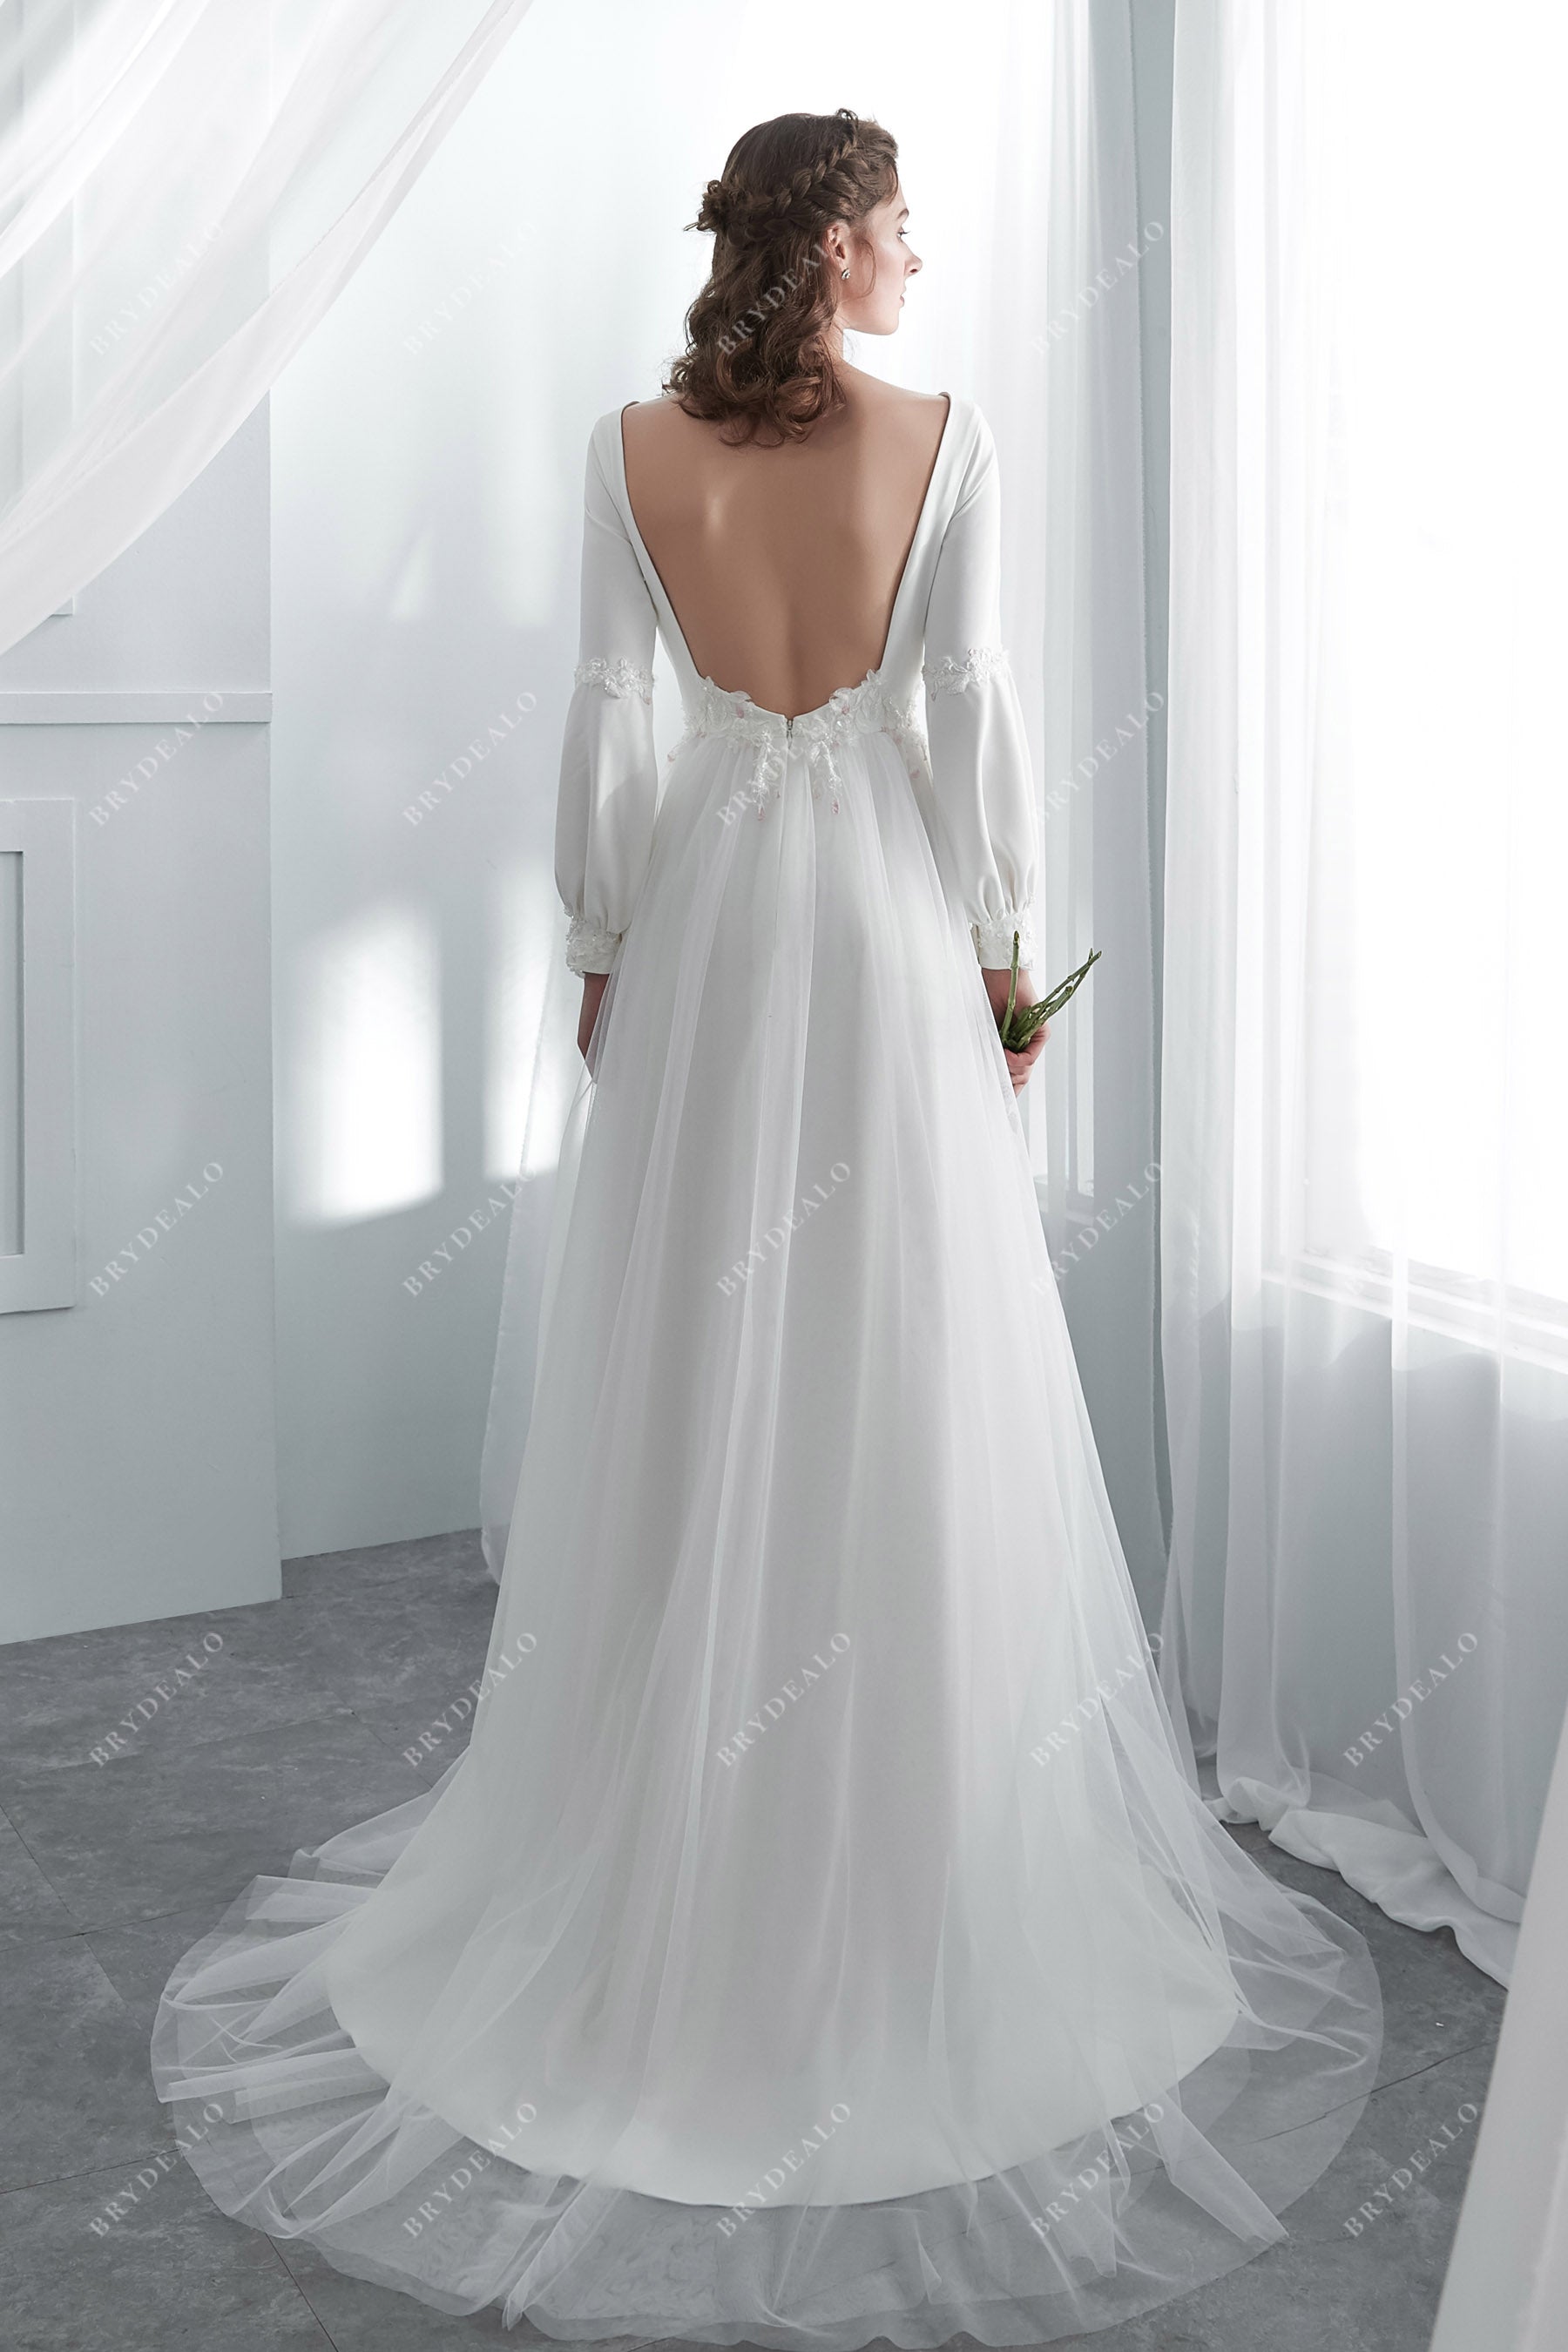 Wedding Dress with Bubble Sleeves